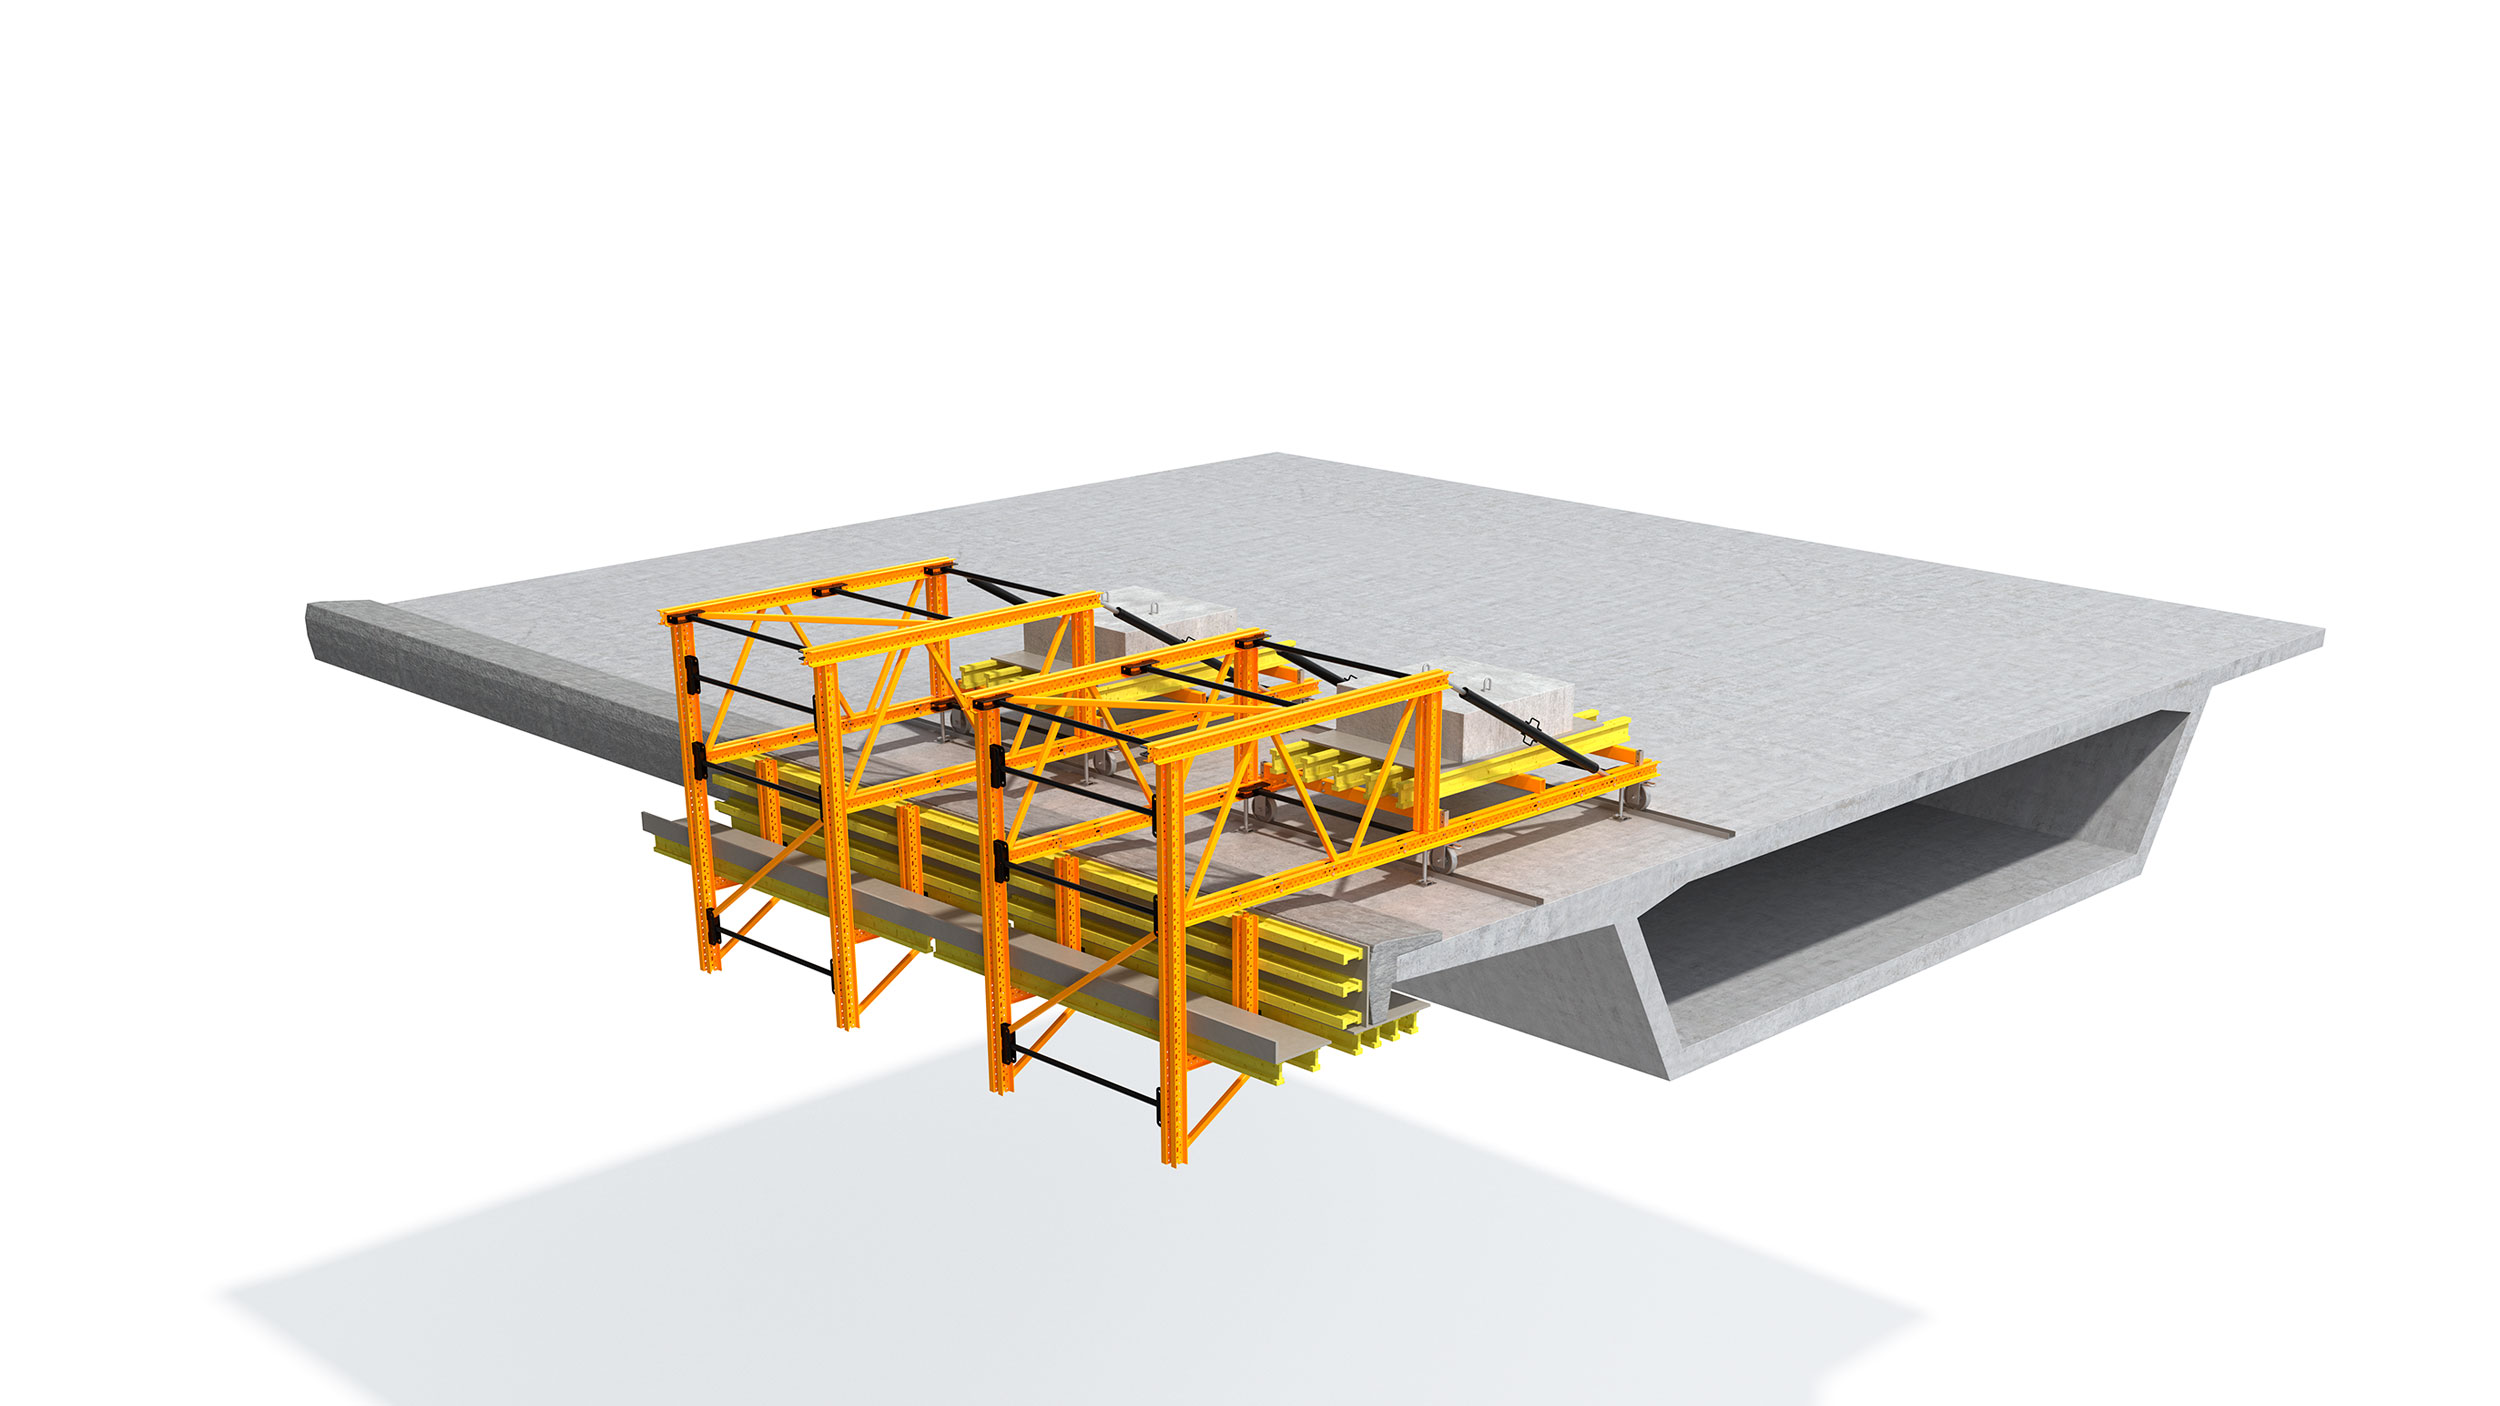 Cantilever formwork for steel composite bridges and partially pre-cast concrete bridges. Highlights: configurable for each project. Allows quick work cycles